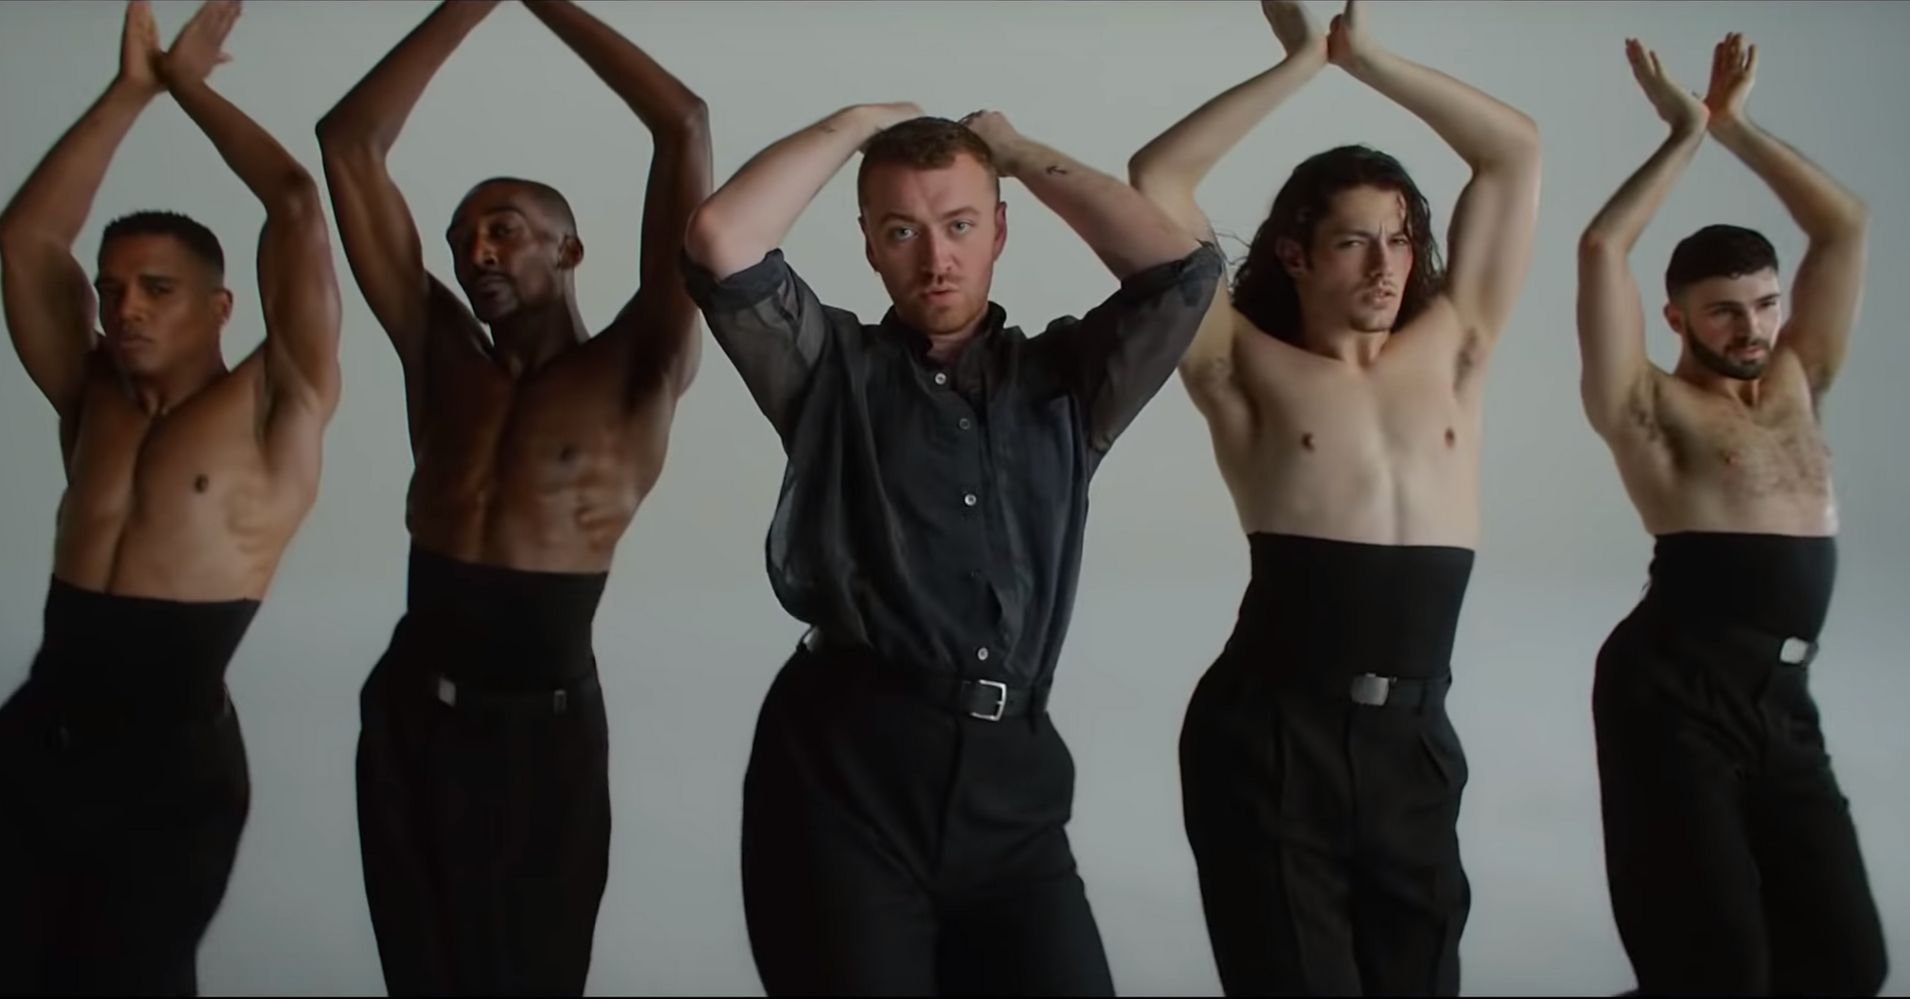 Sam Smith Showcases His Dancing Skills In New Video For ‘How Do You Sleep?’